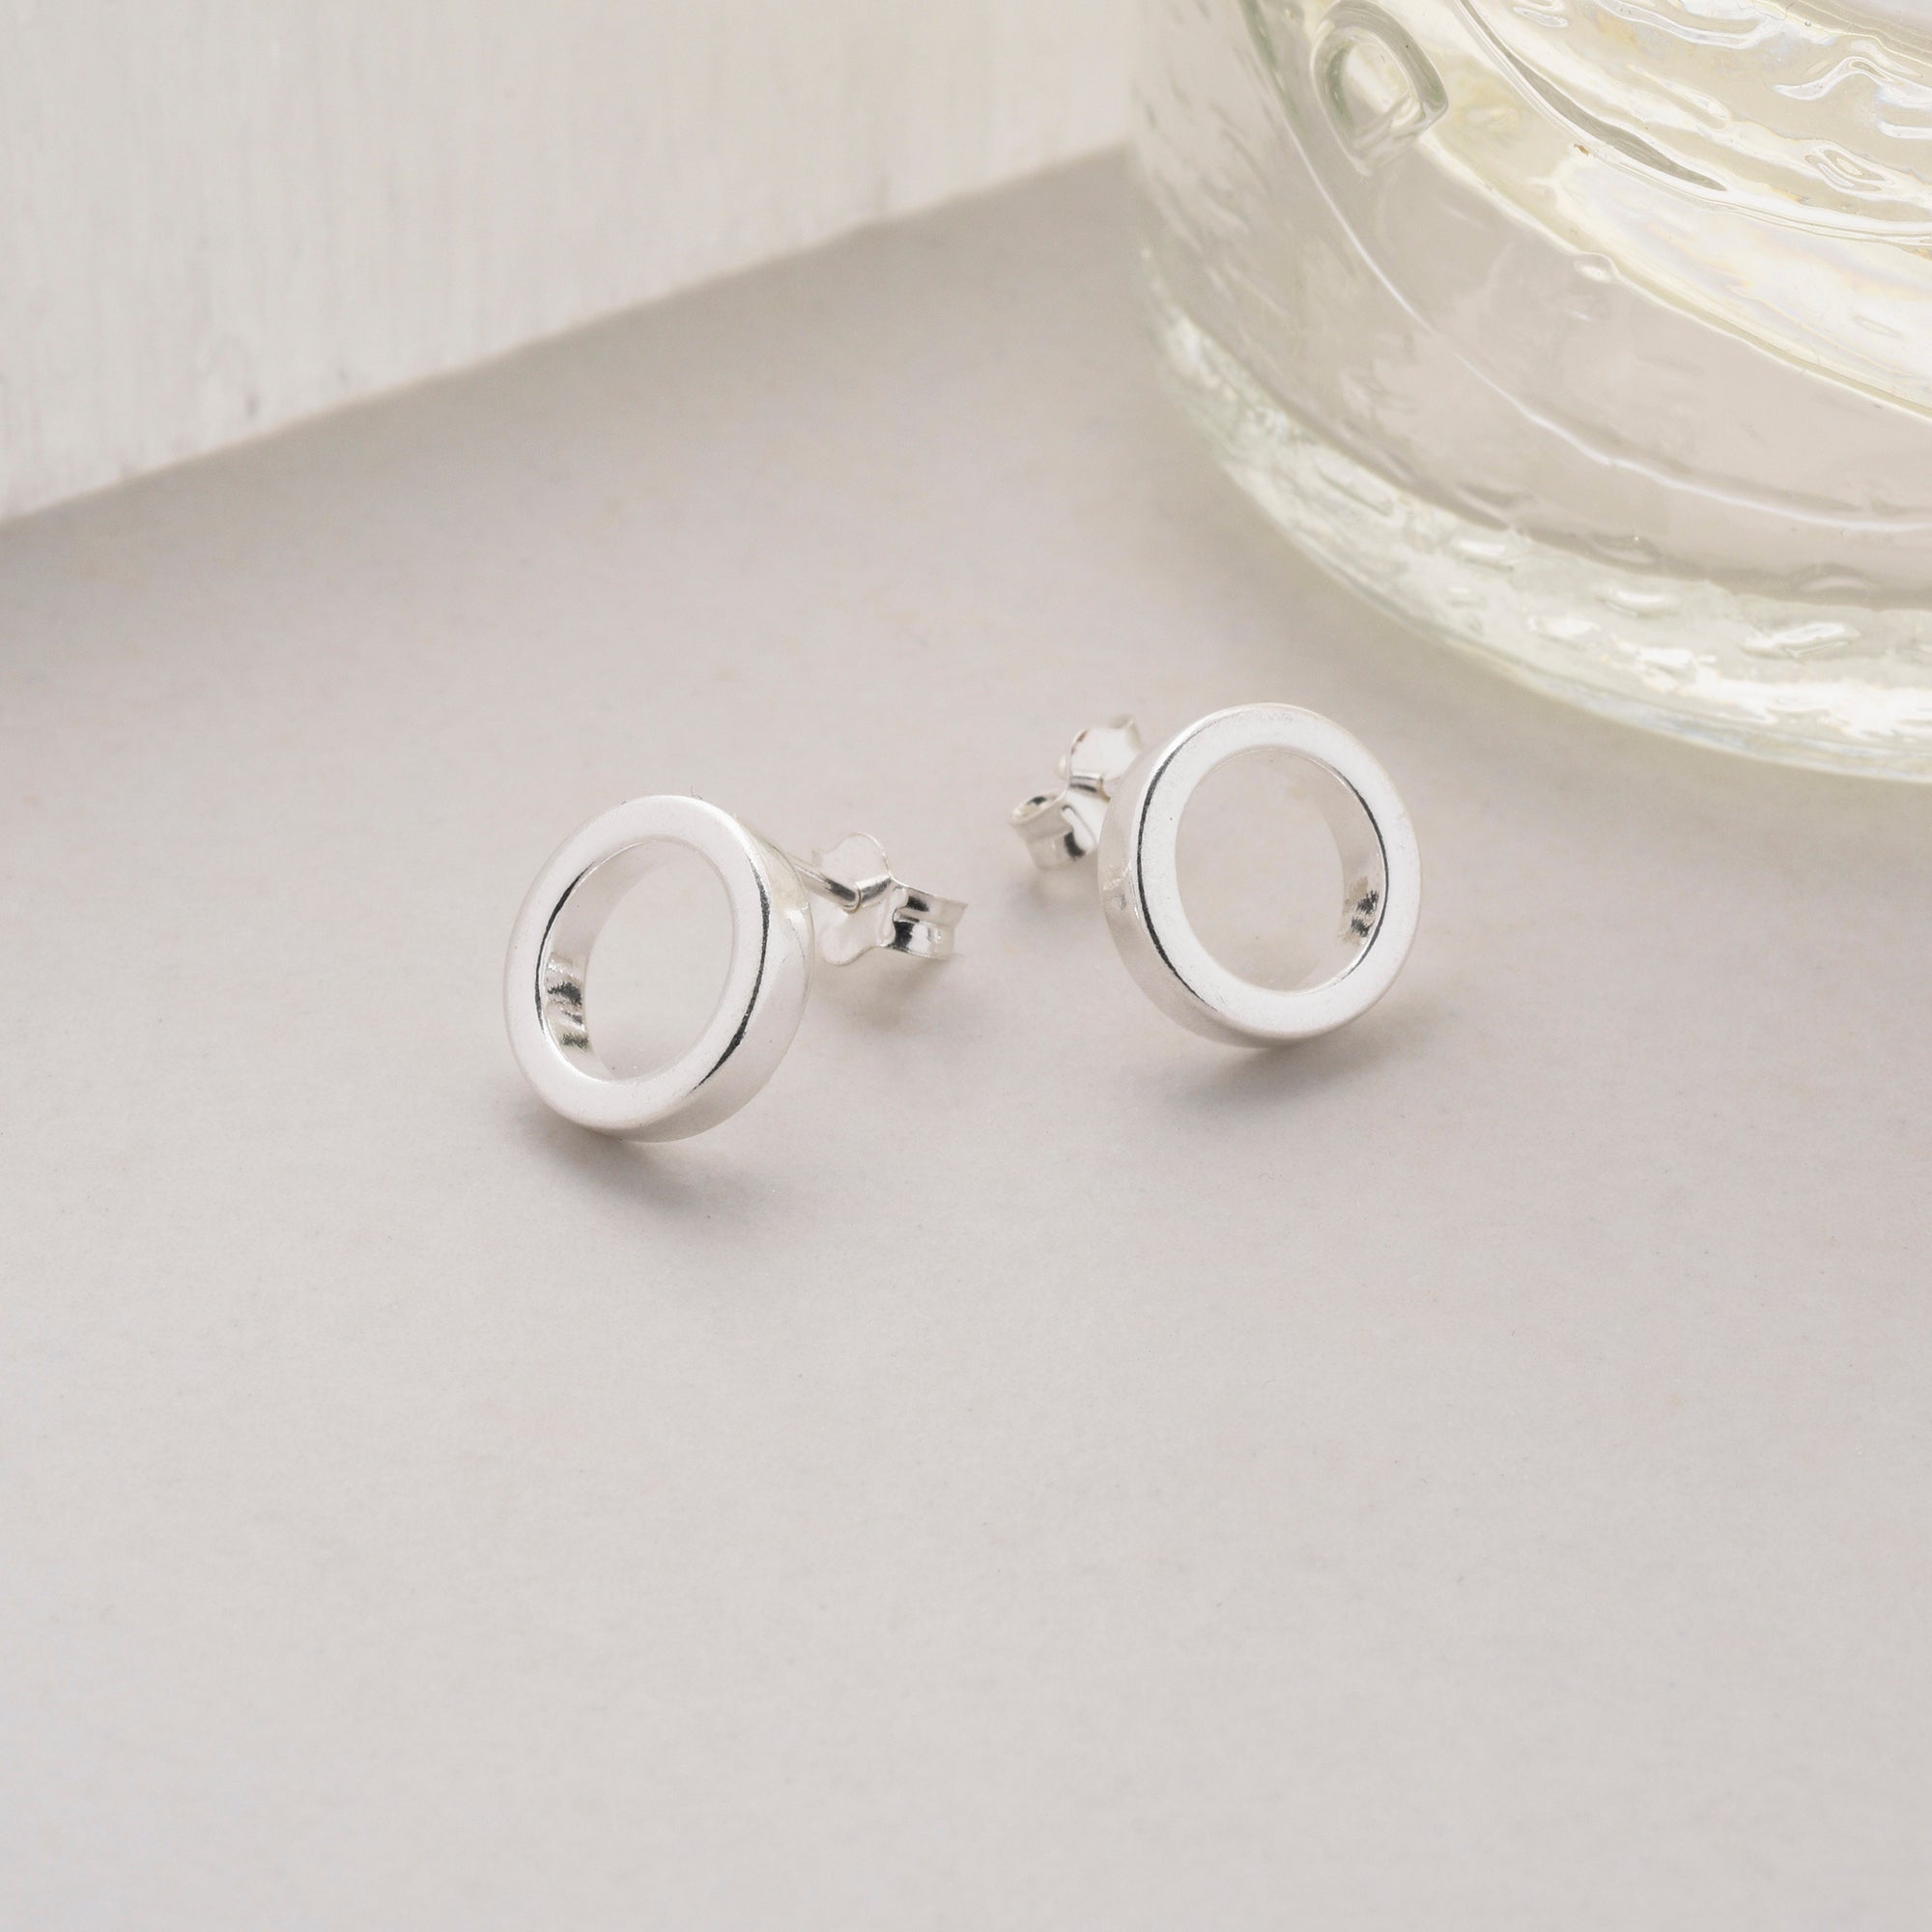 pair of circle earstuds next to a vase